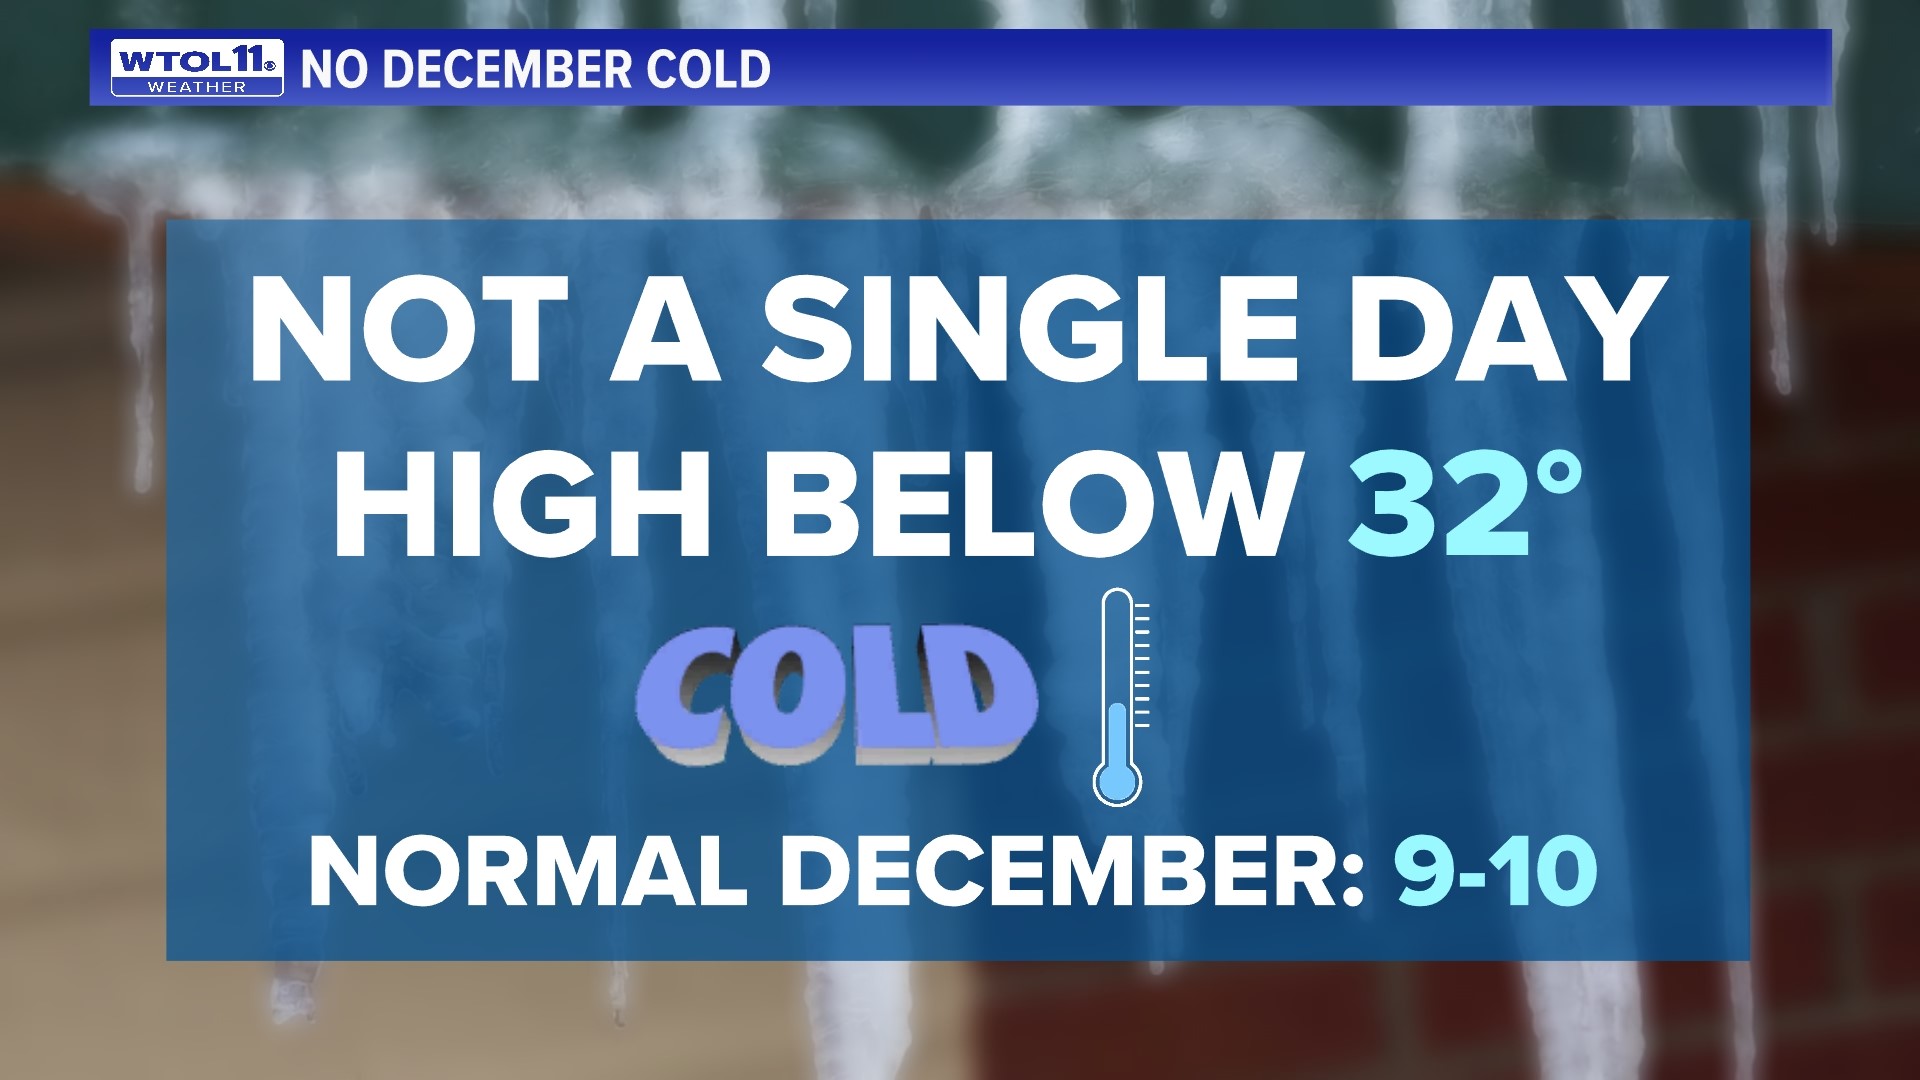 Did you notice the unseasonable warmth and lack of snow this past December? Meteorologist John Burchfield breaks down data trends.